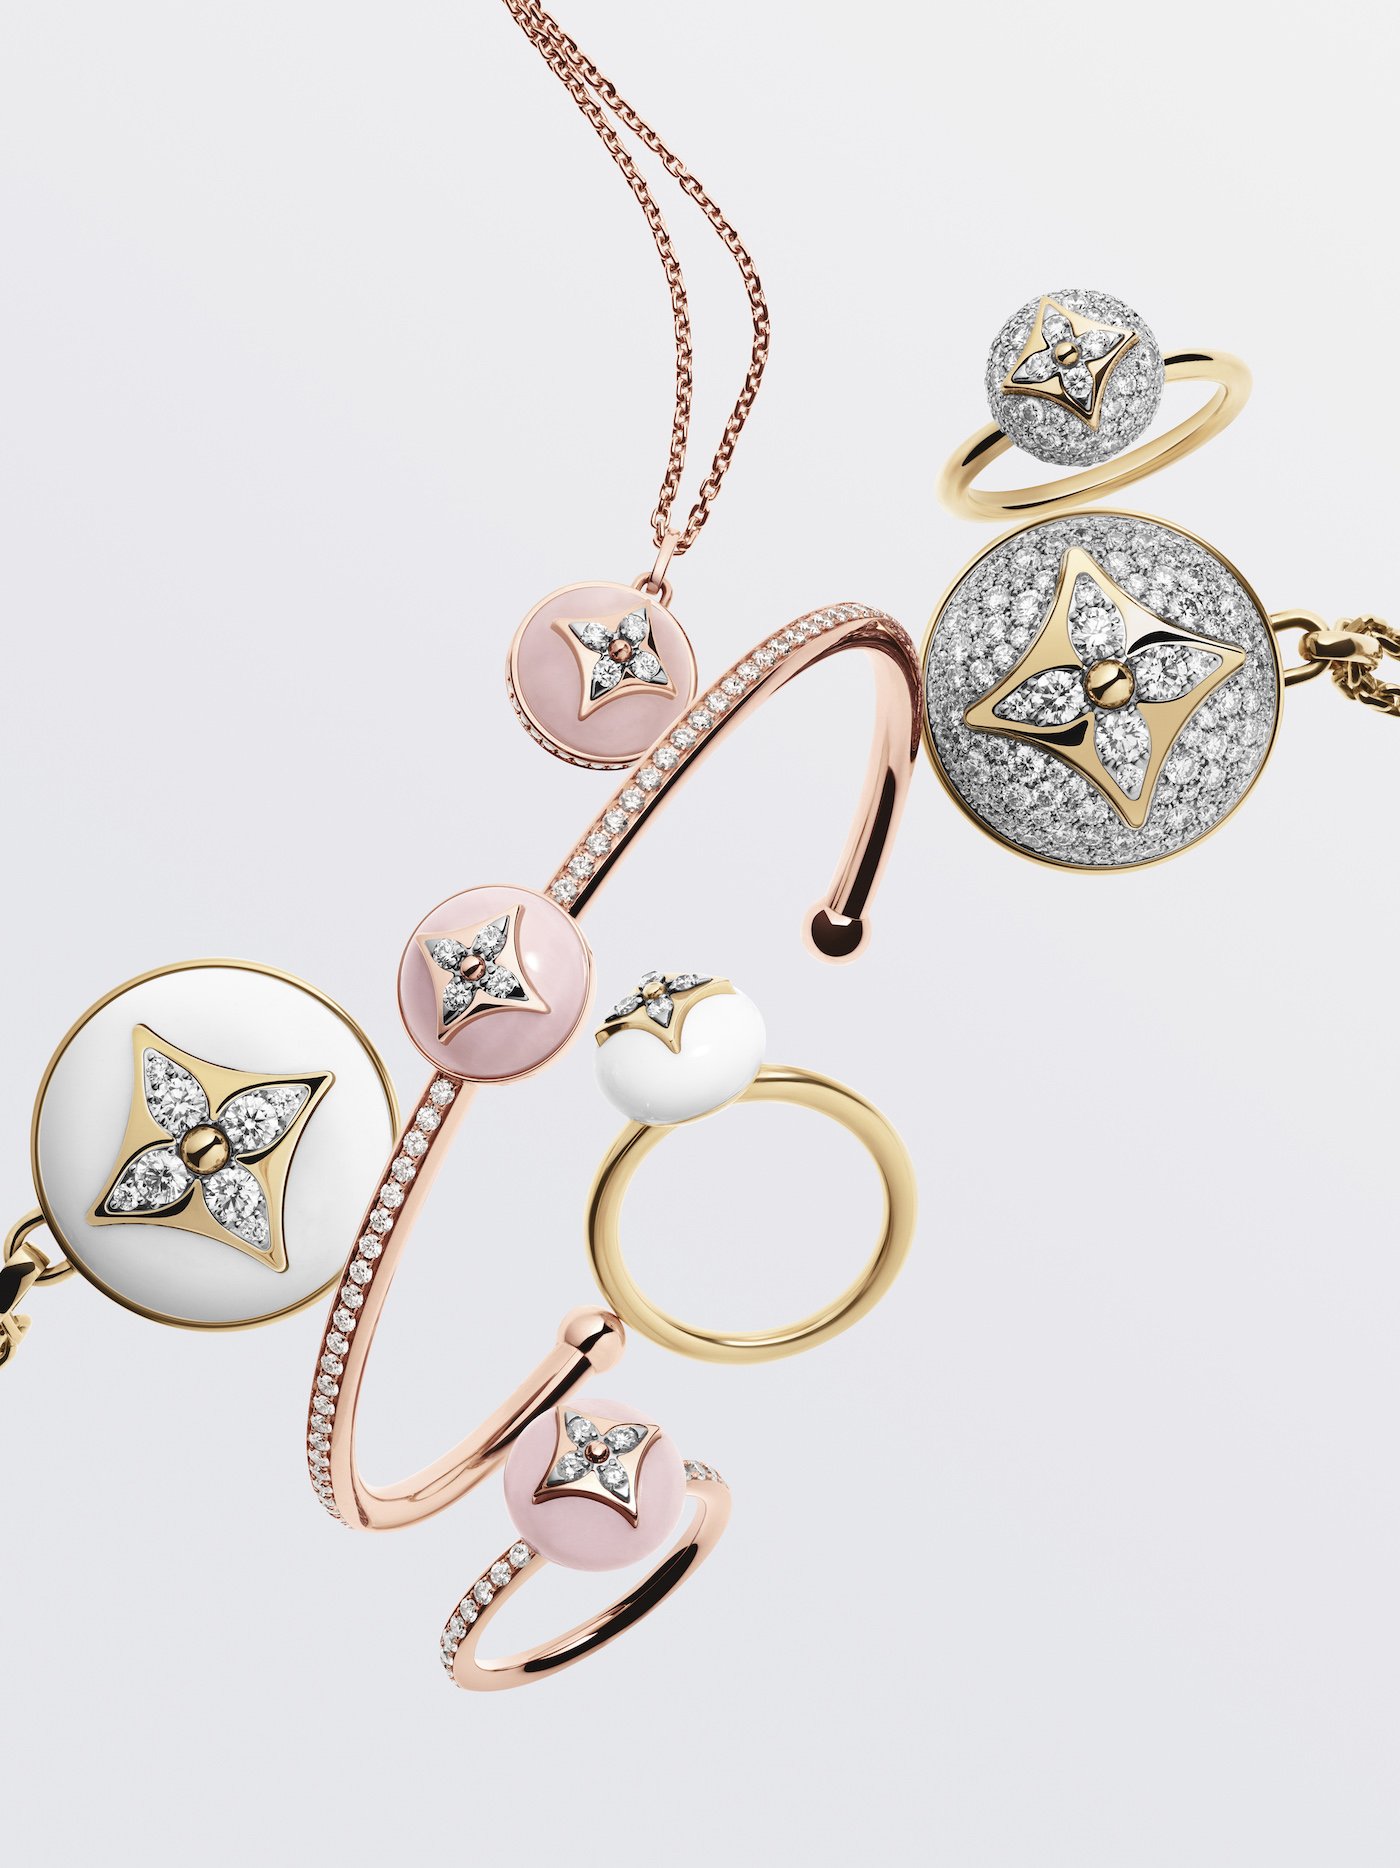 Louis Vuitton B Blossom Fine Jewellery Collection Marks Debut of Francesca  Amfitheatrof at the Helm